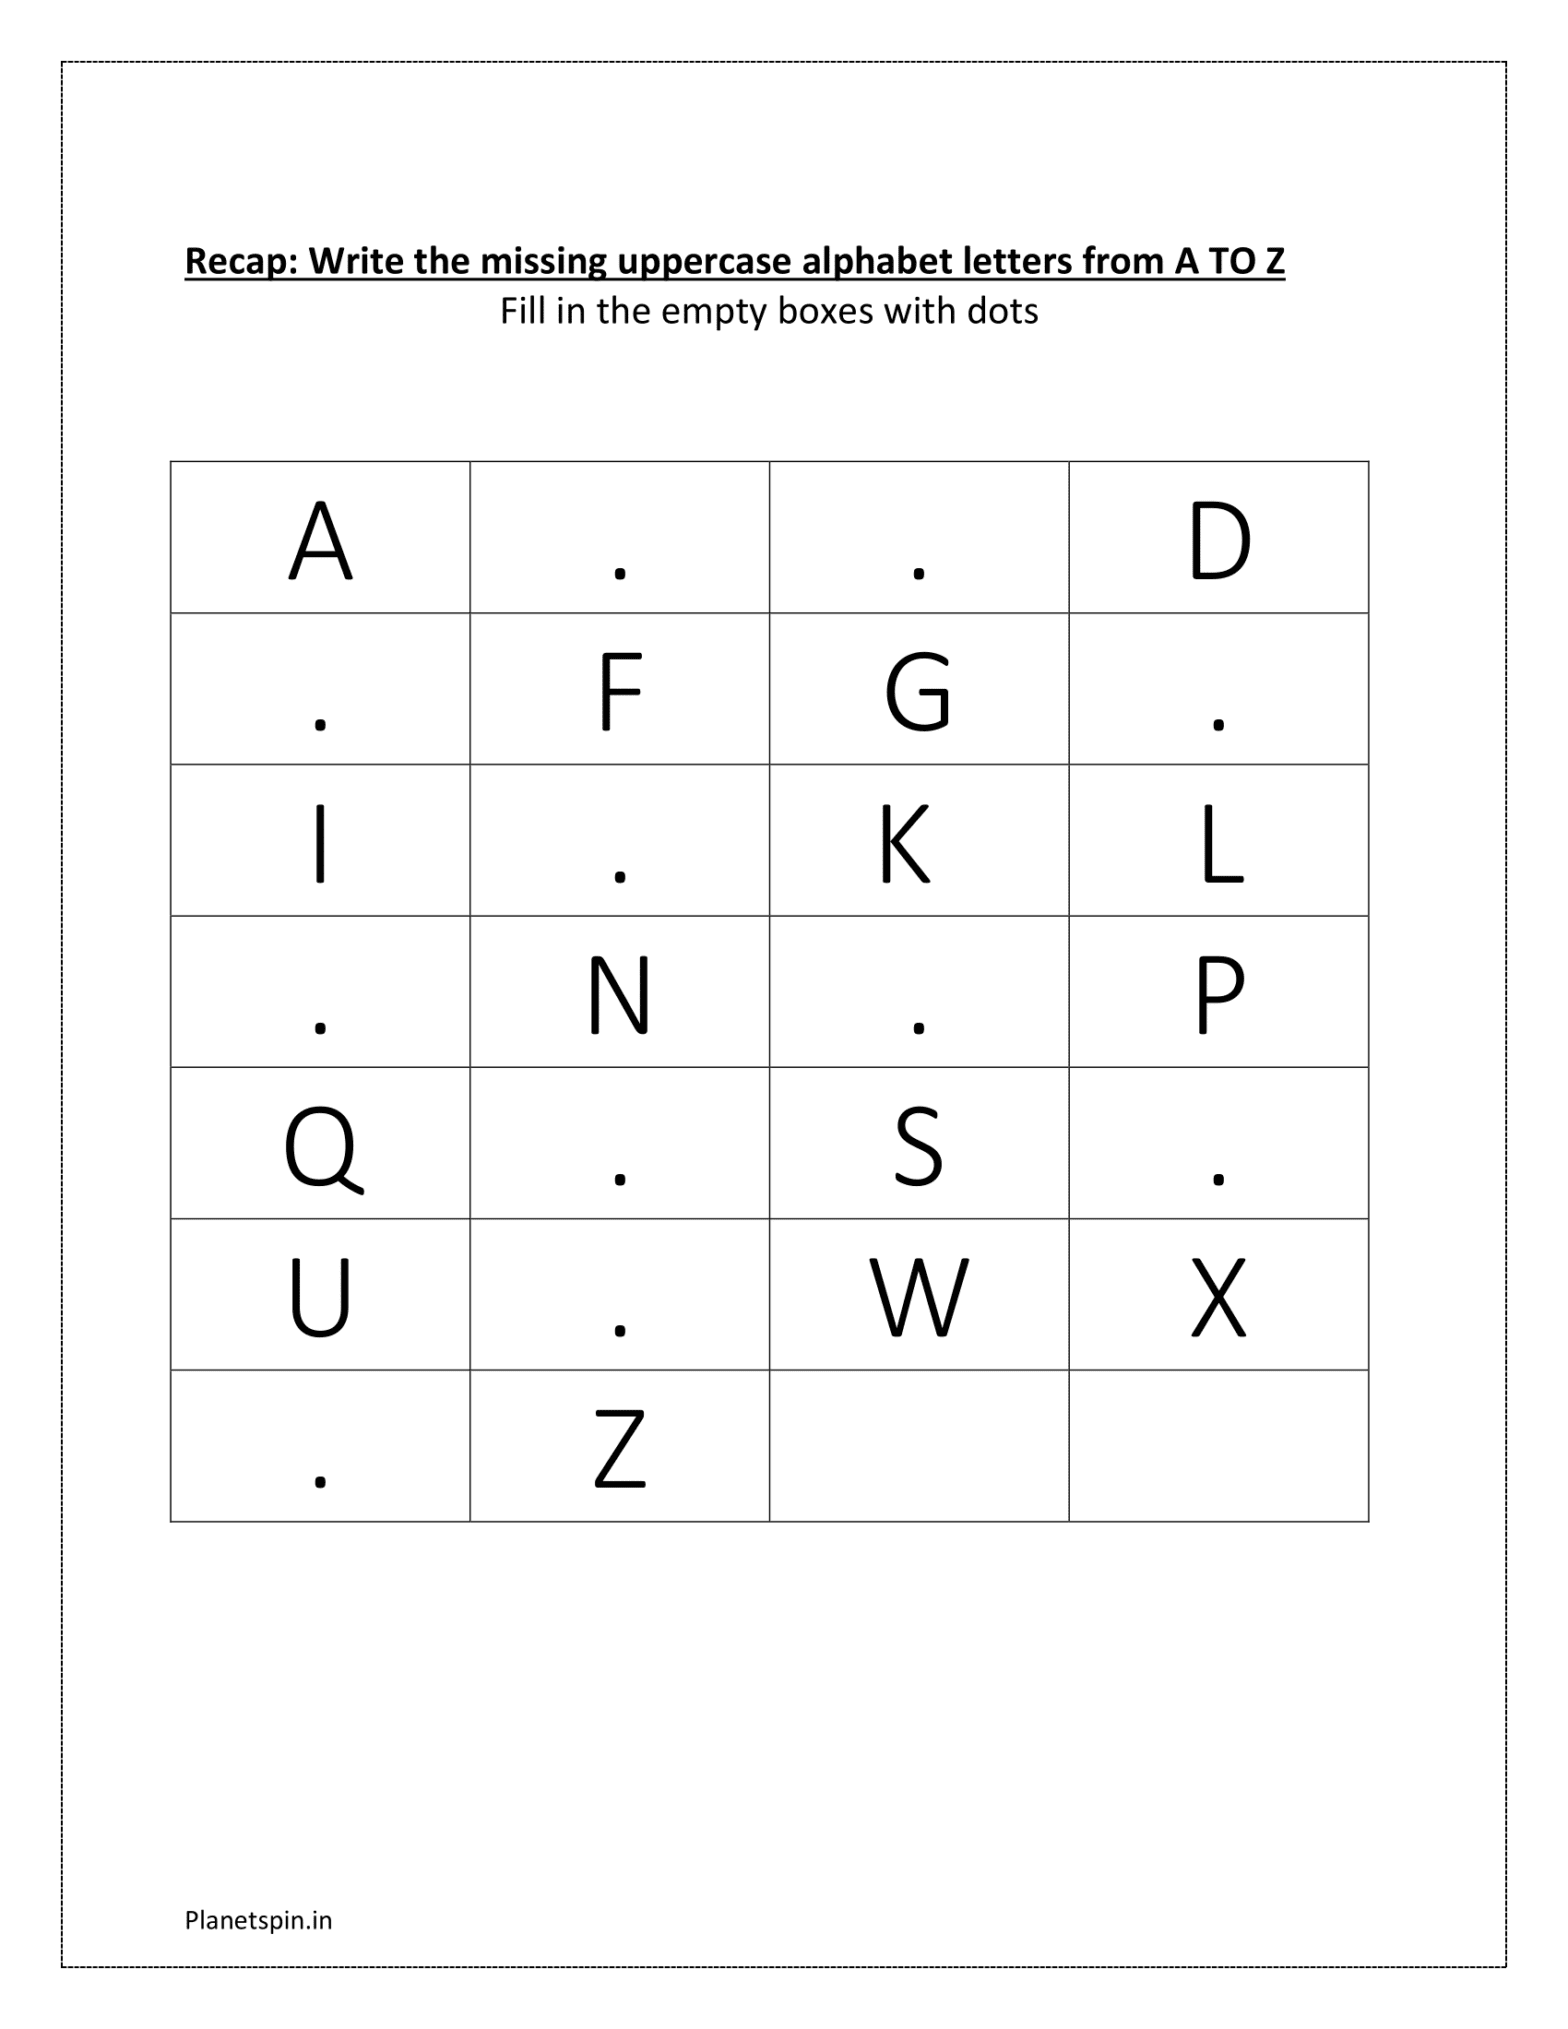 Fill in the missing letters worksheet for kindergarten | Planetspin.in